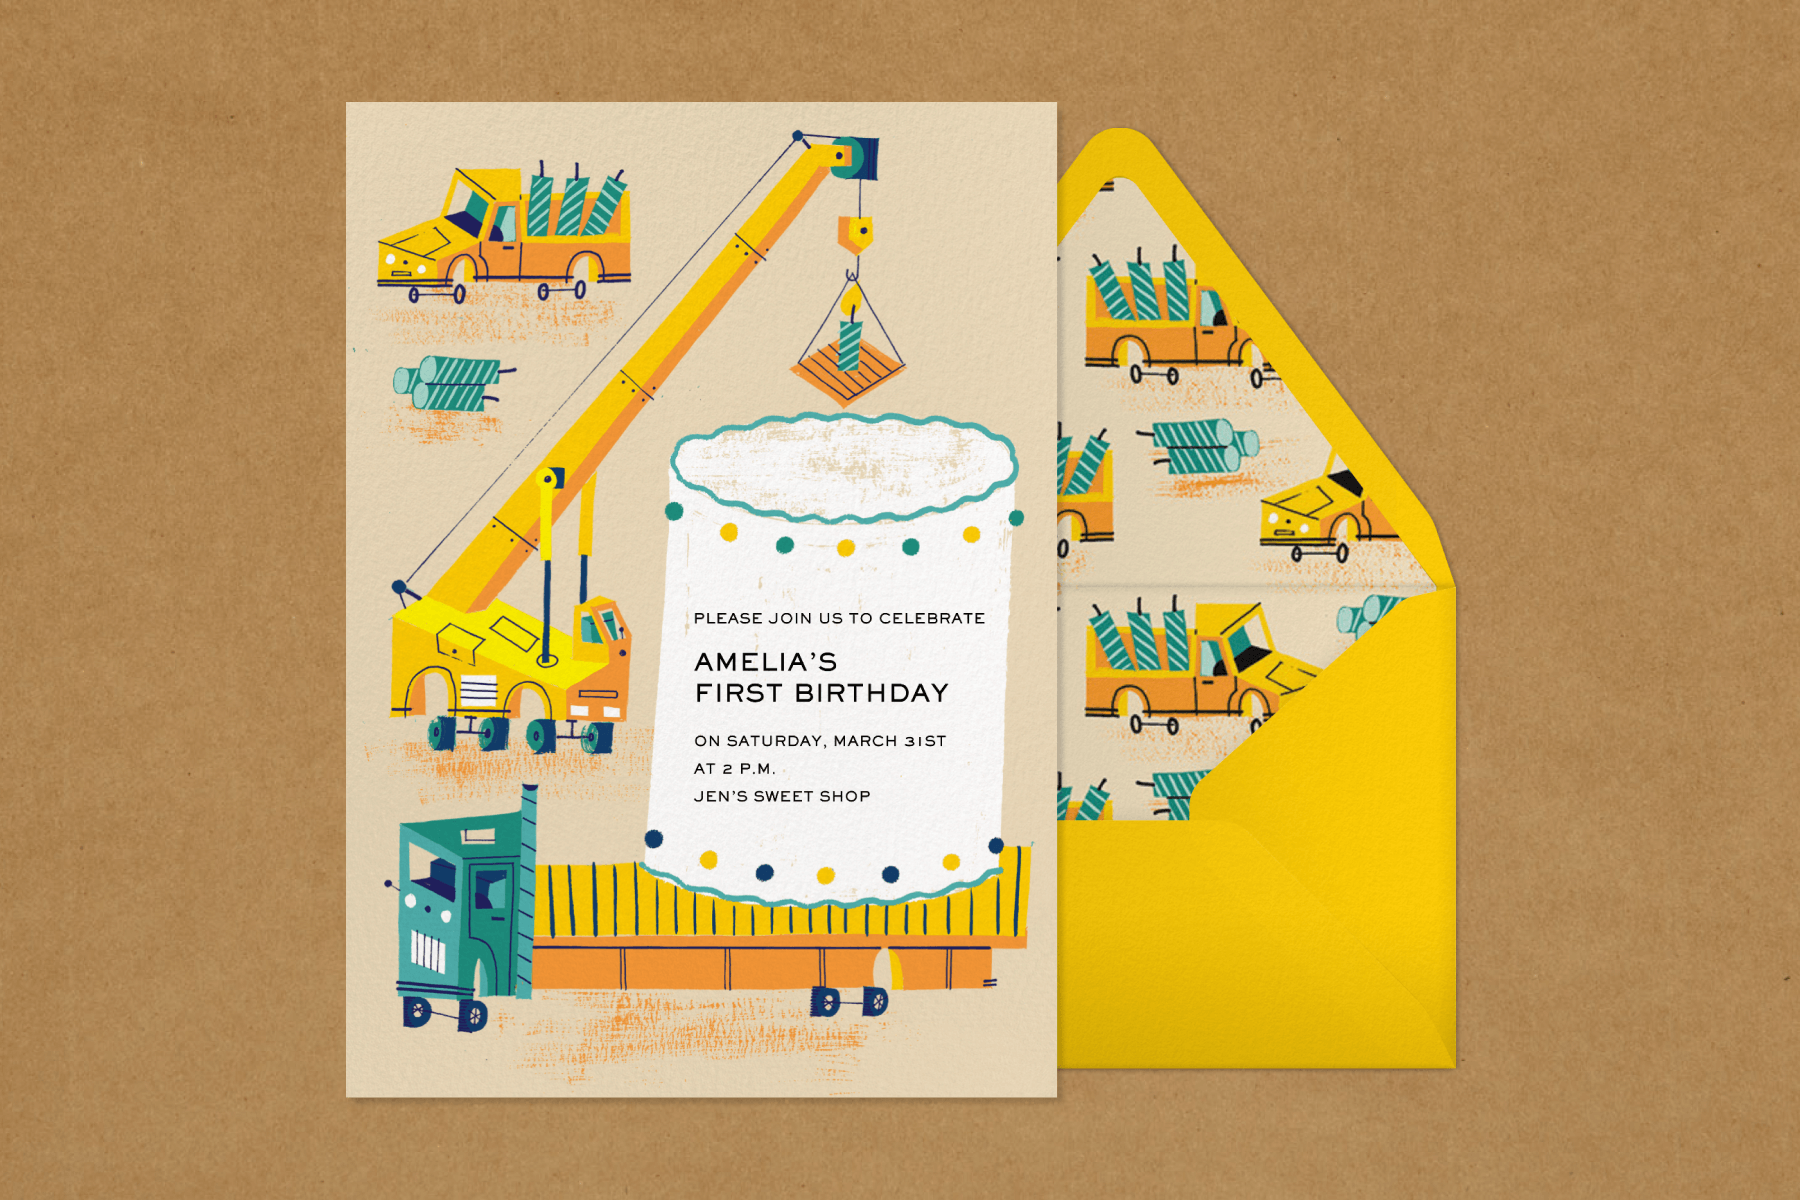 A birthday invitation reads “Amelia’s first birthday” with illustrations of orange trucks and cranes placing a candle atop a giant white cake.